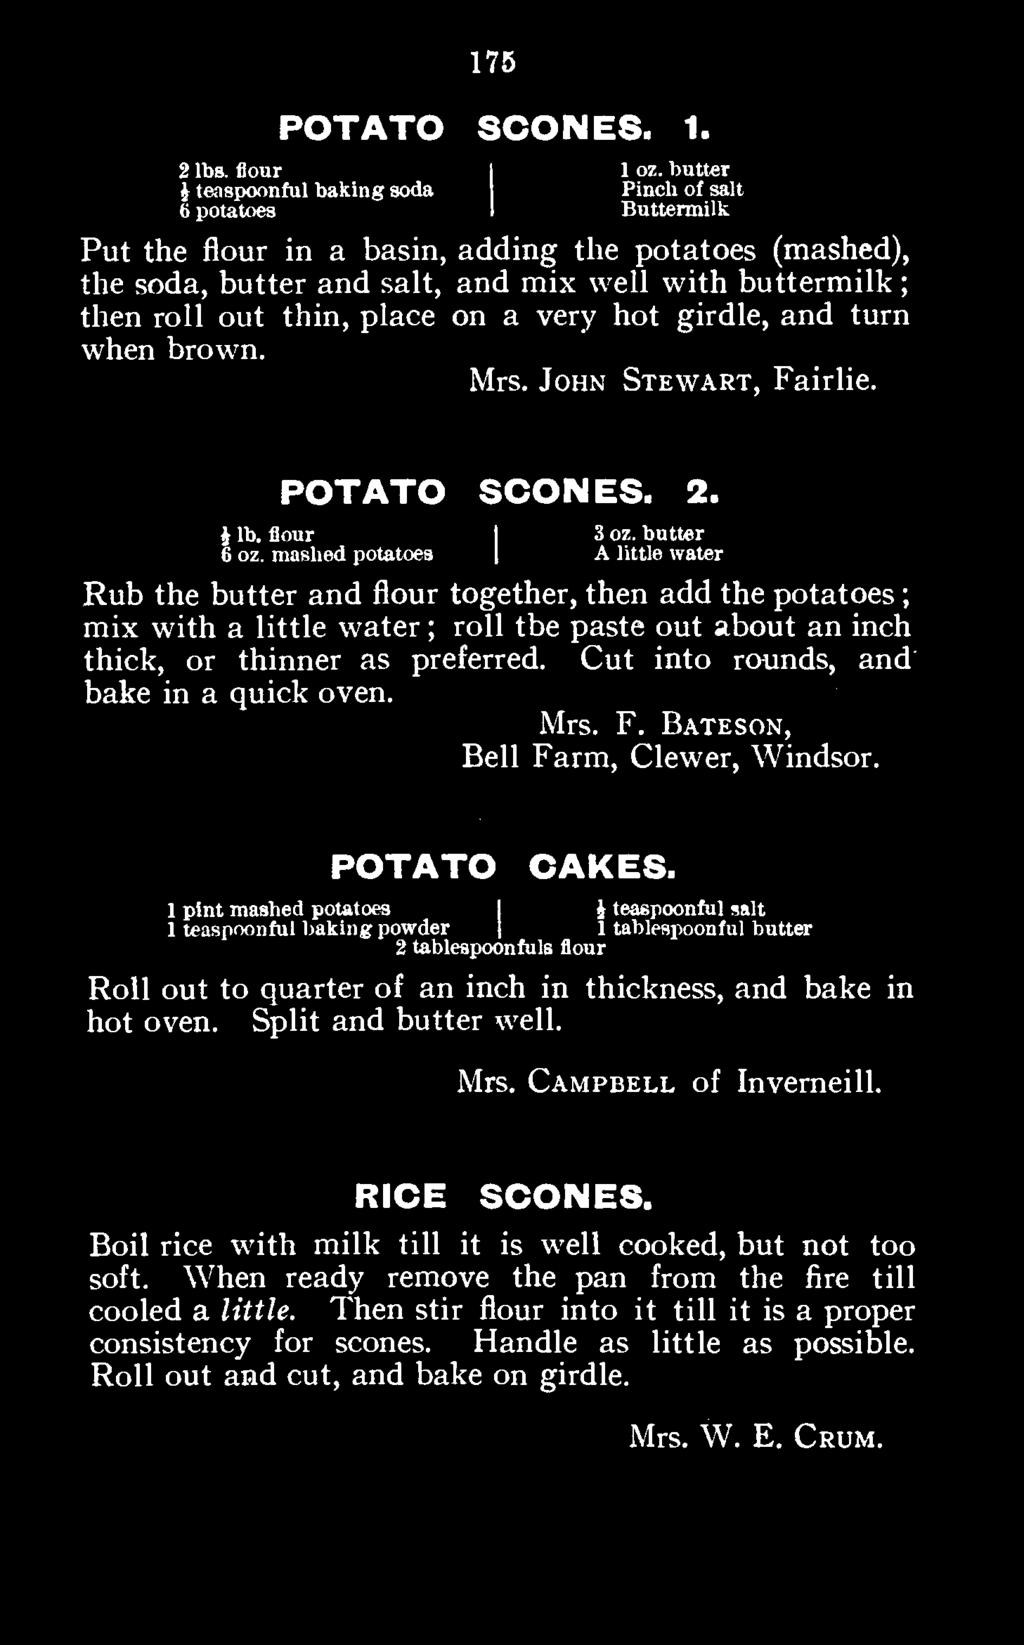 Cut into rounds, and bake in a quick oven. Mrs. F. Bateson, Bell Farm, Clewer, Windsor. POTATO CAKES.